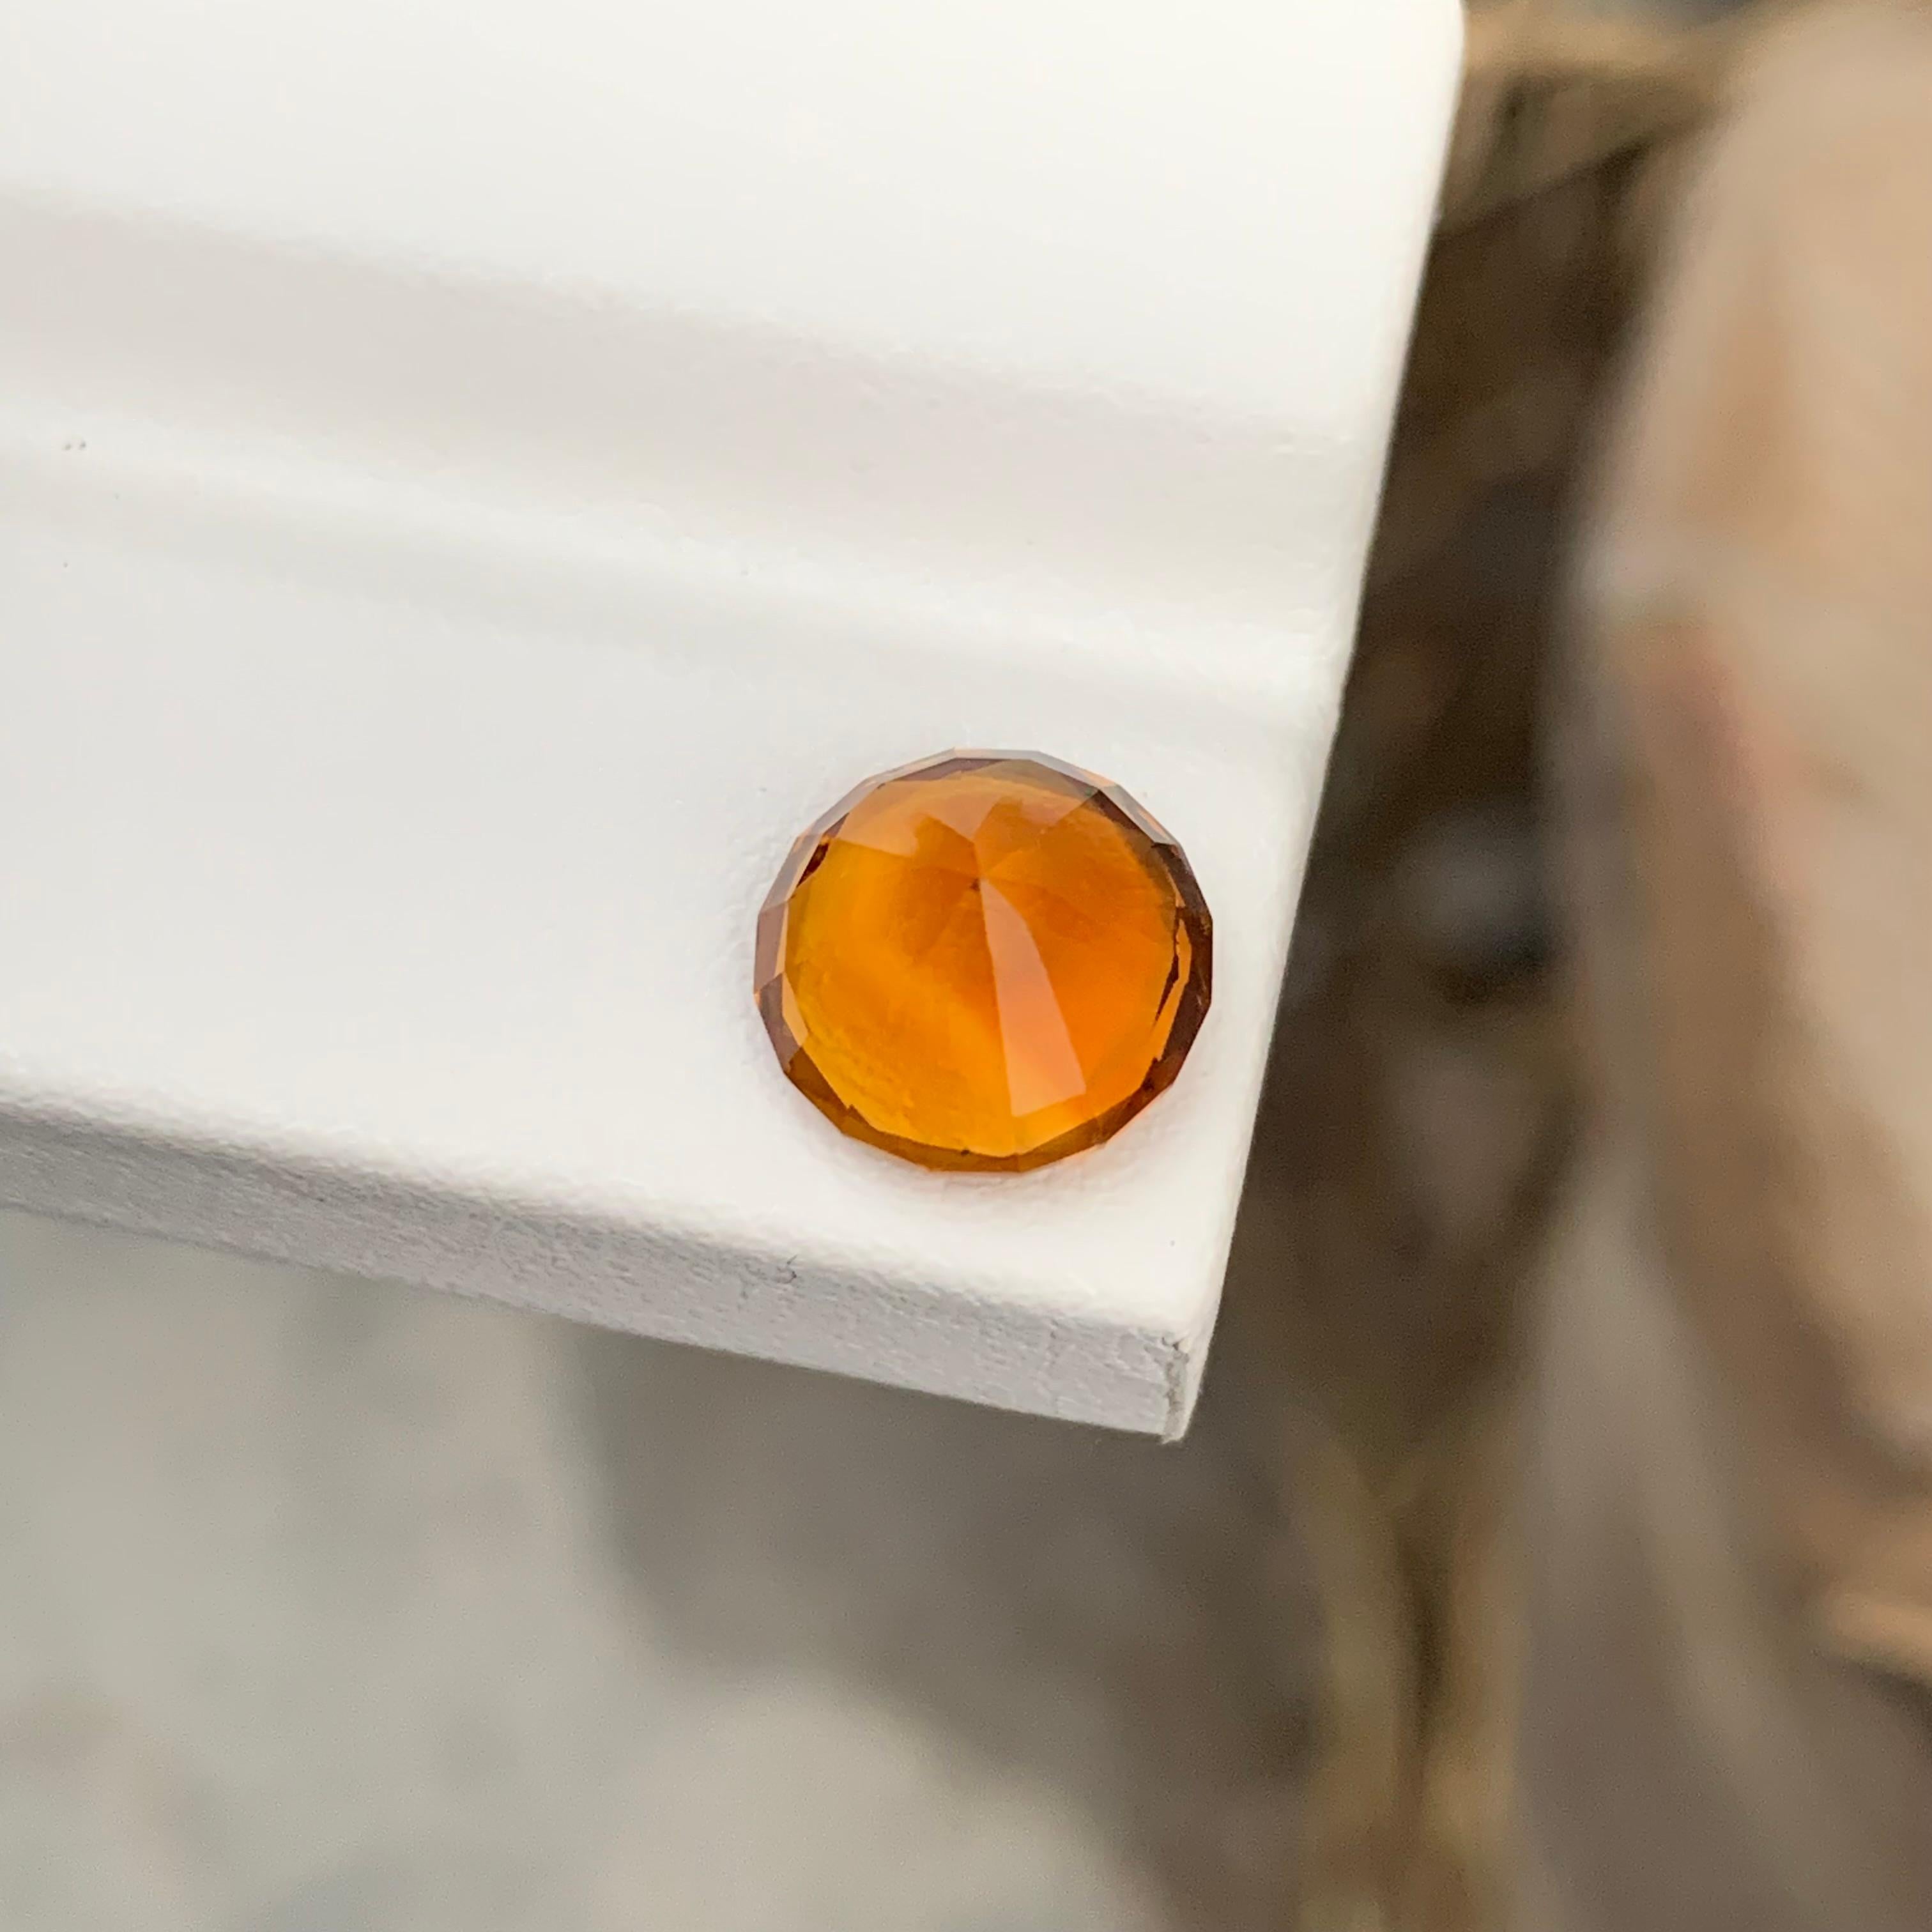 Loose Mandarin Citrine 
Weight: 3.10 Carats 
Dimension: 9.6x9.6x6.3 Mm
Origin: Brazil
Shape: Round
Color: Orange
Certificate: On Demand 
Madeira Citrine, named after the warm and rich tones resembling the sunset over the Madeira region, is a variety